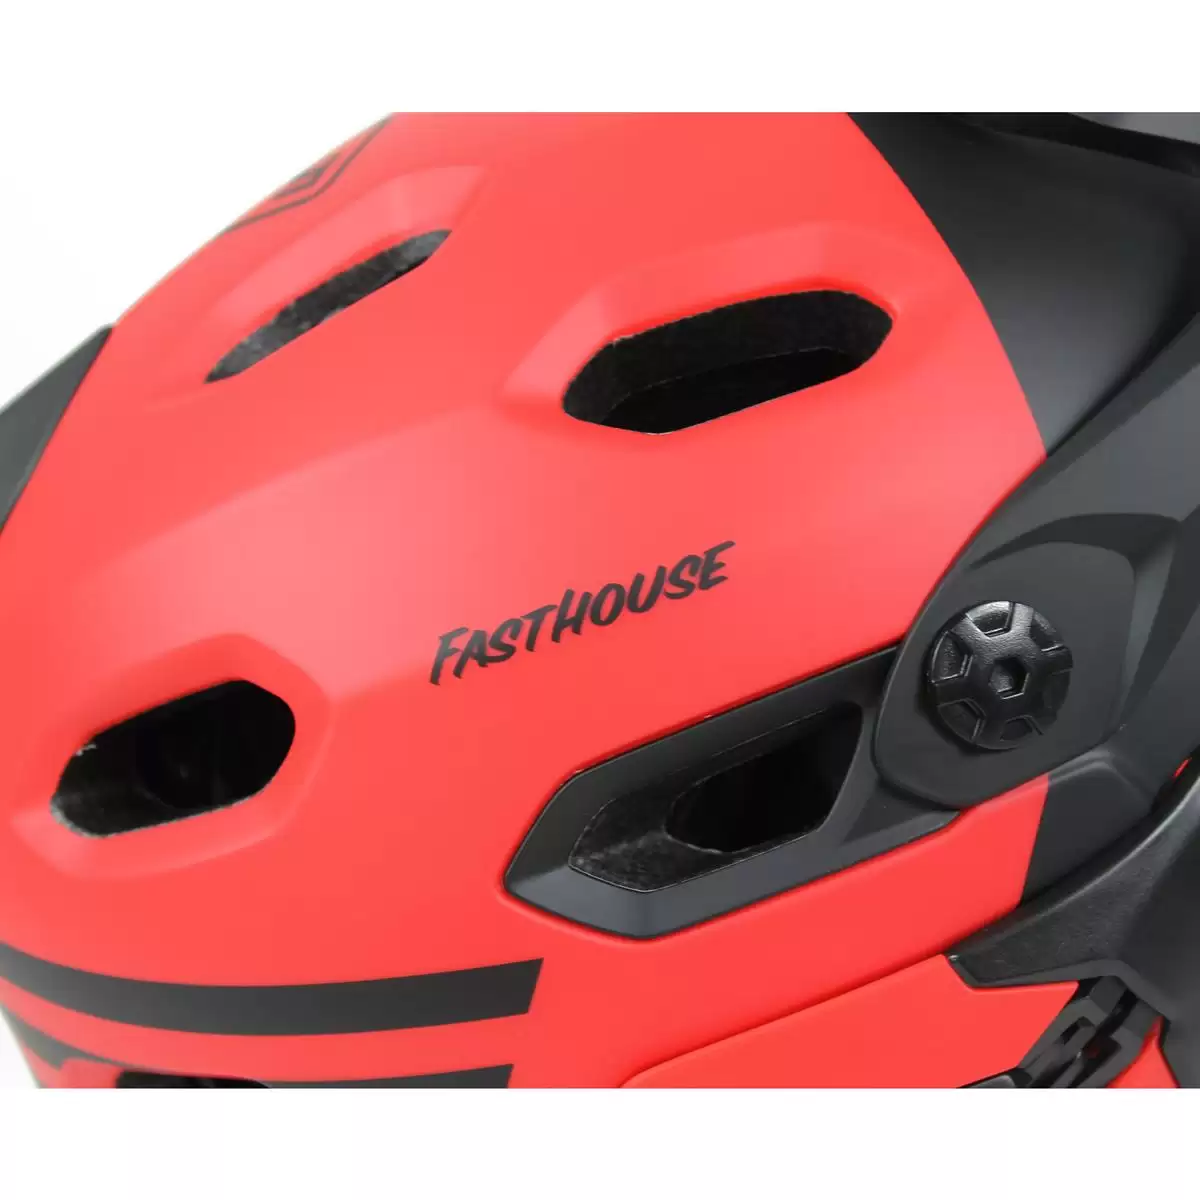 Helm Super DH MIPS Fasthouse Rot Größe S (52-56cm) #5